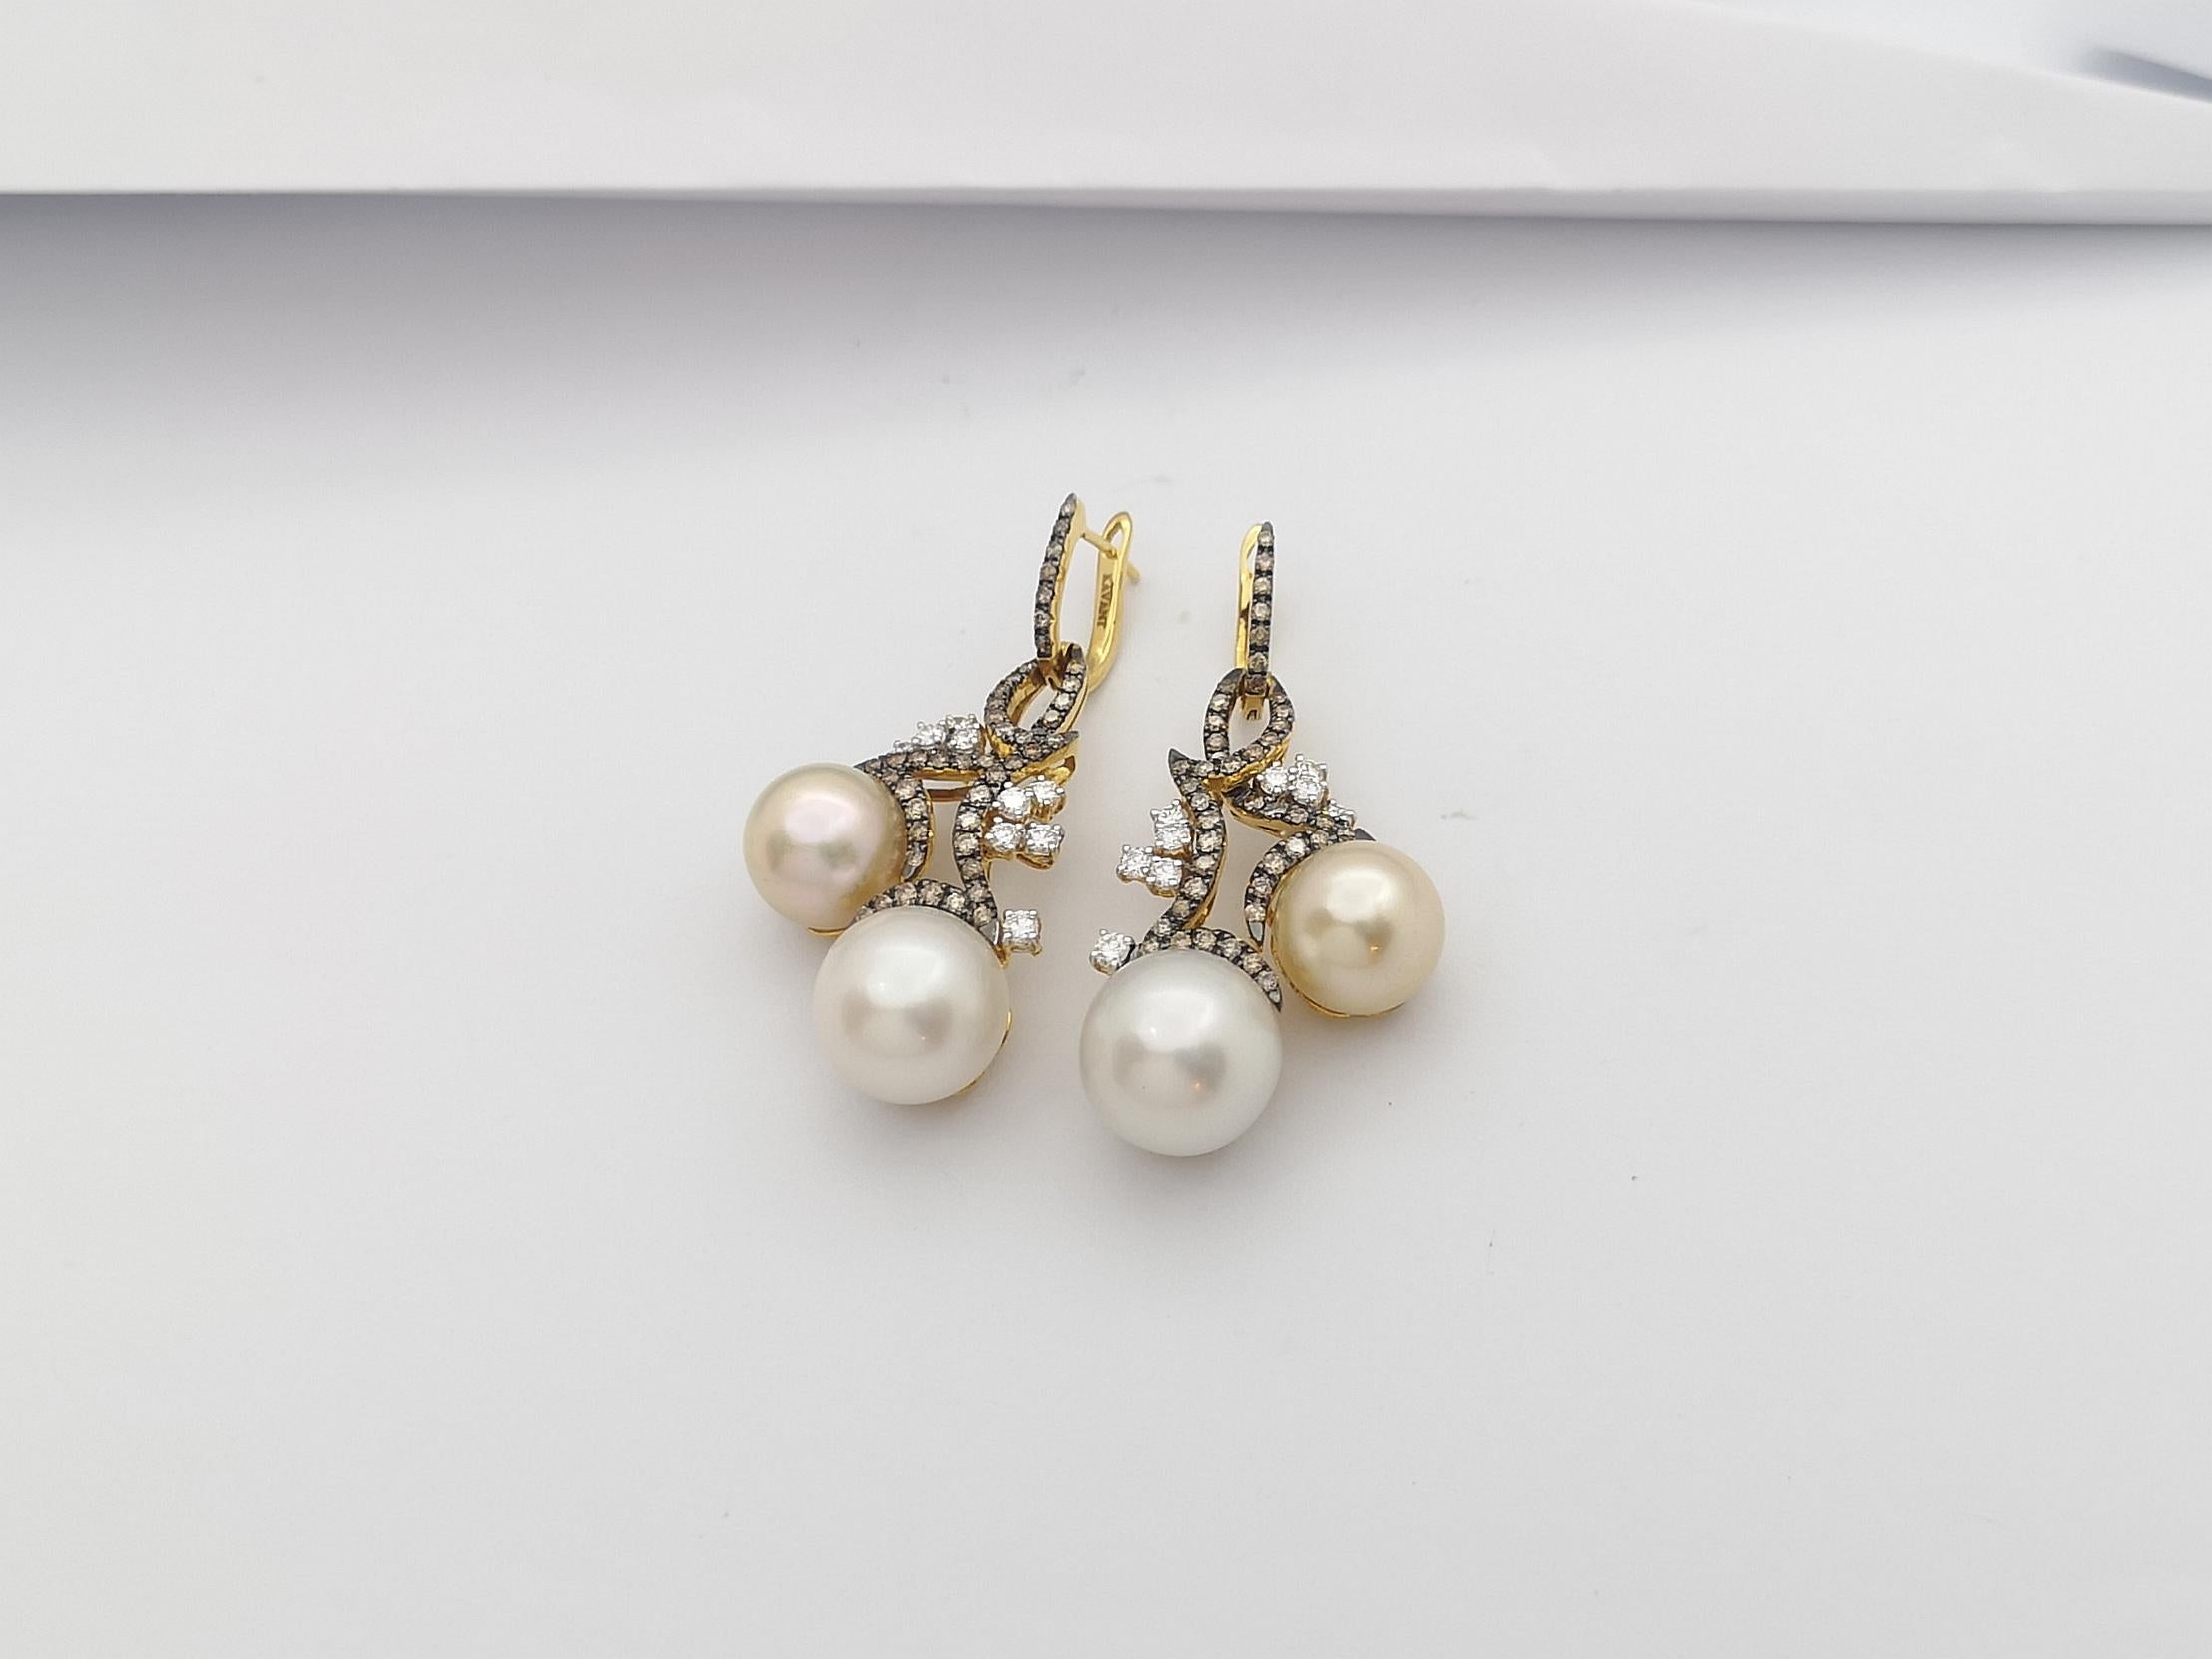 Brilliant Cut South Sea Pearl with Brown Diamond and Diamond Earrings Set in 18 Karat Gold  For Sale